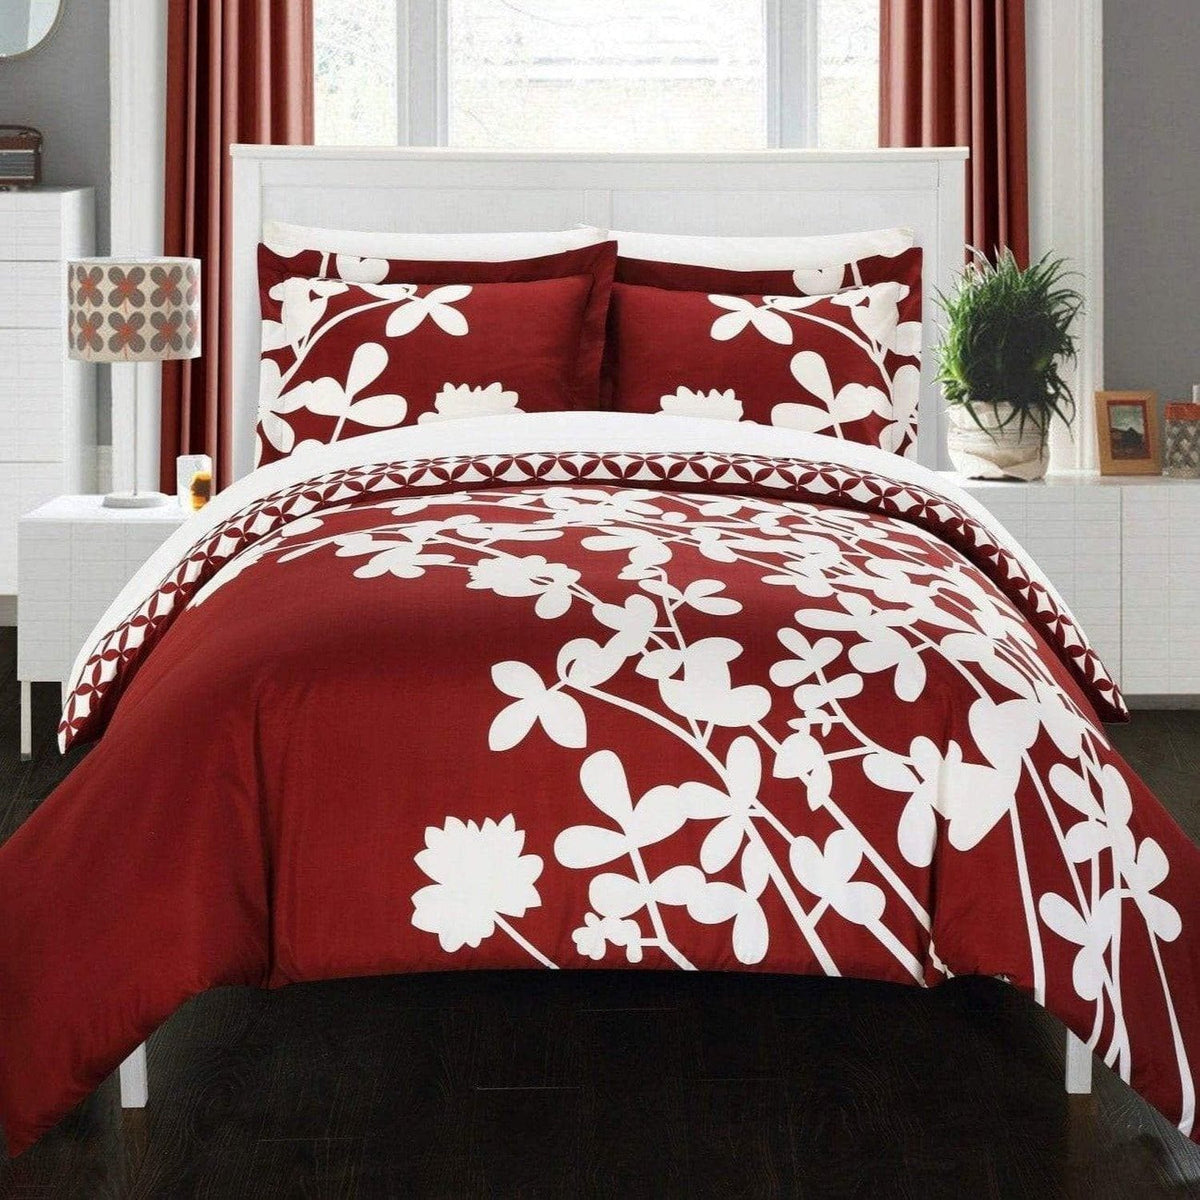 Chic Home Calla Lily 7 Piece Floral Duvet Cover Set Red